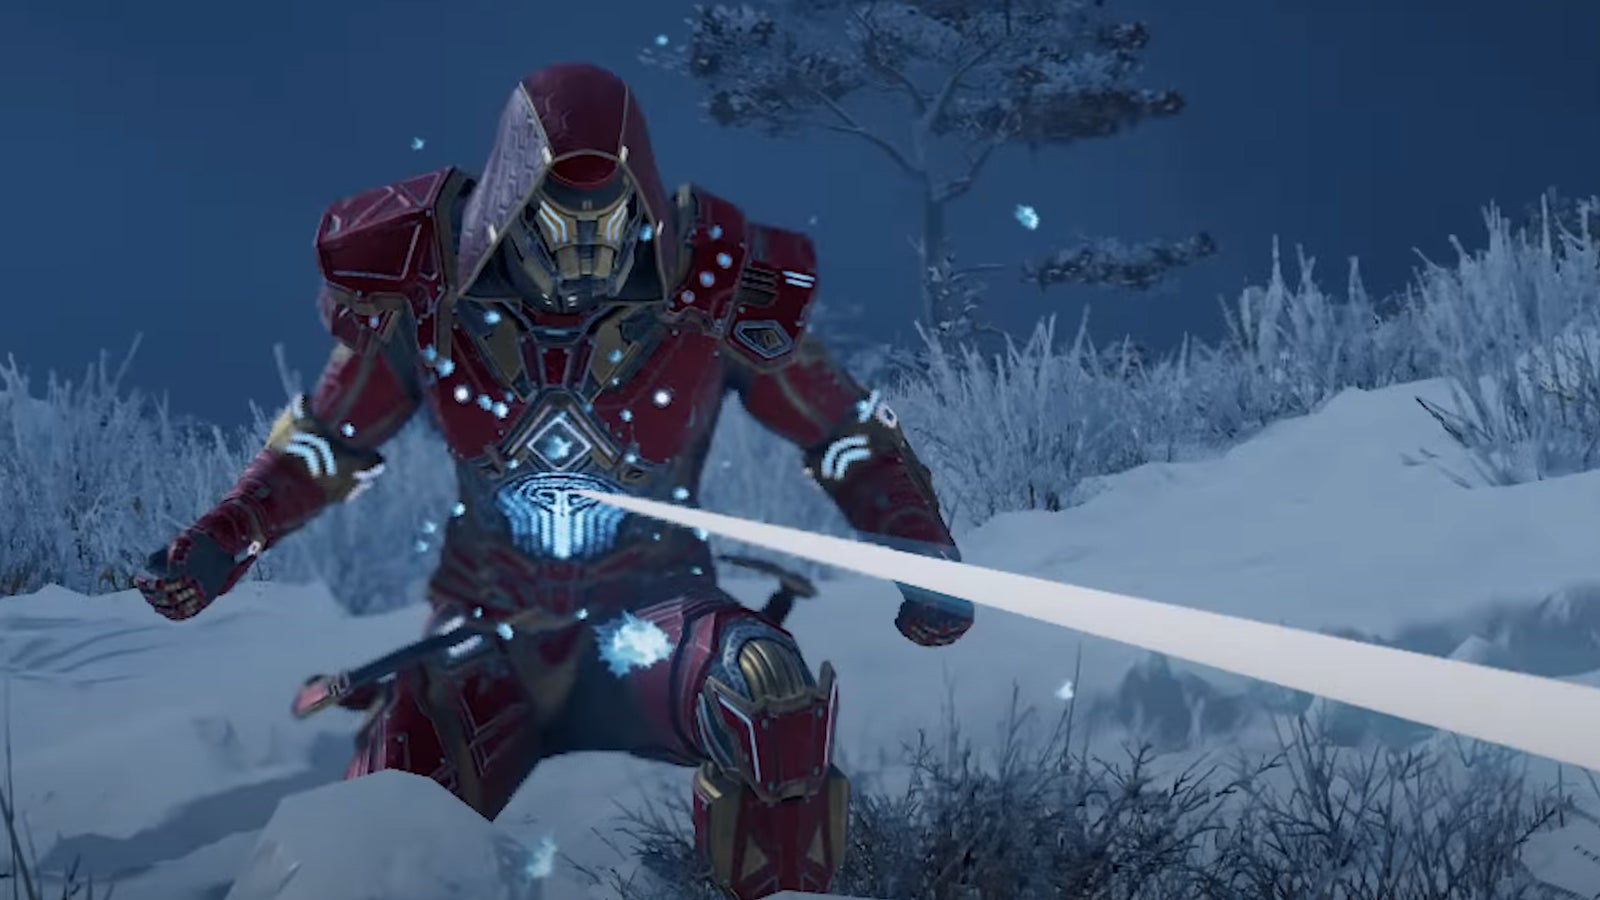 Assassin's Creed Valhalla's Iron Man-inspired armour.